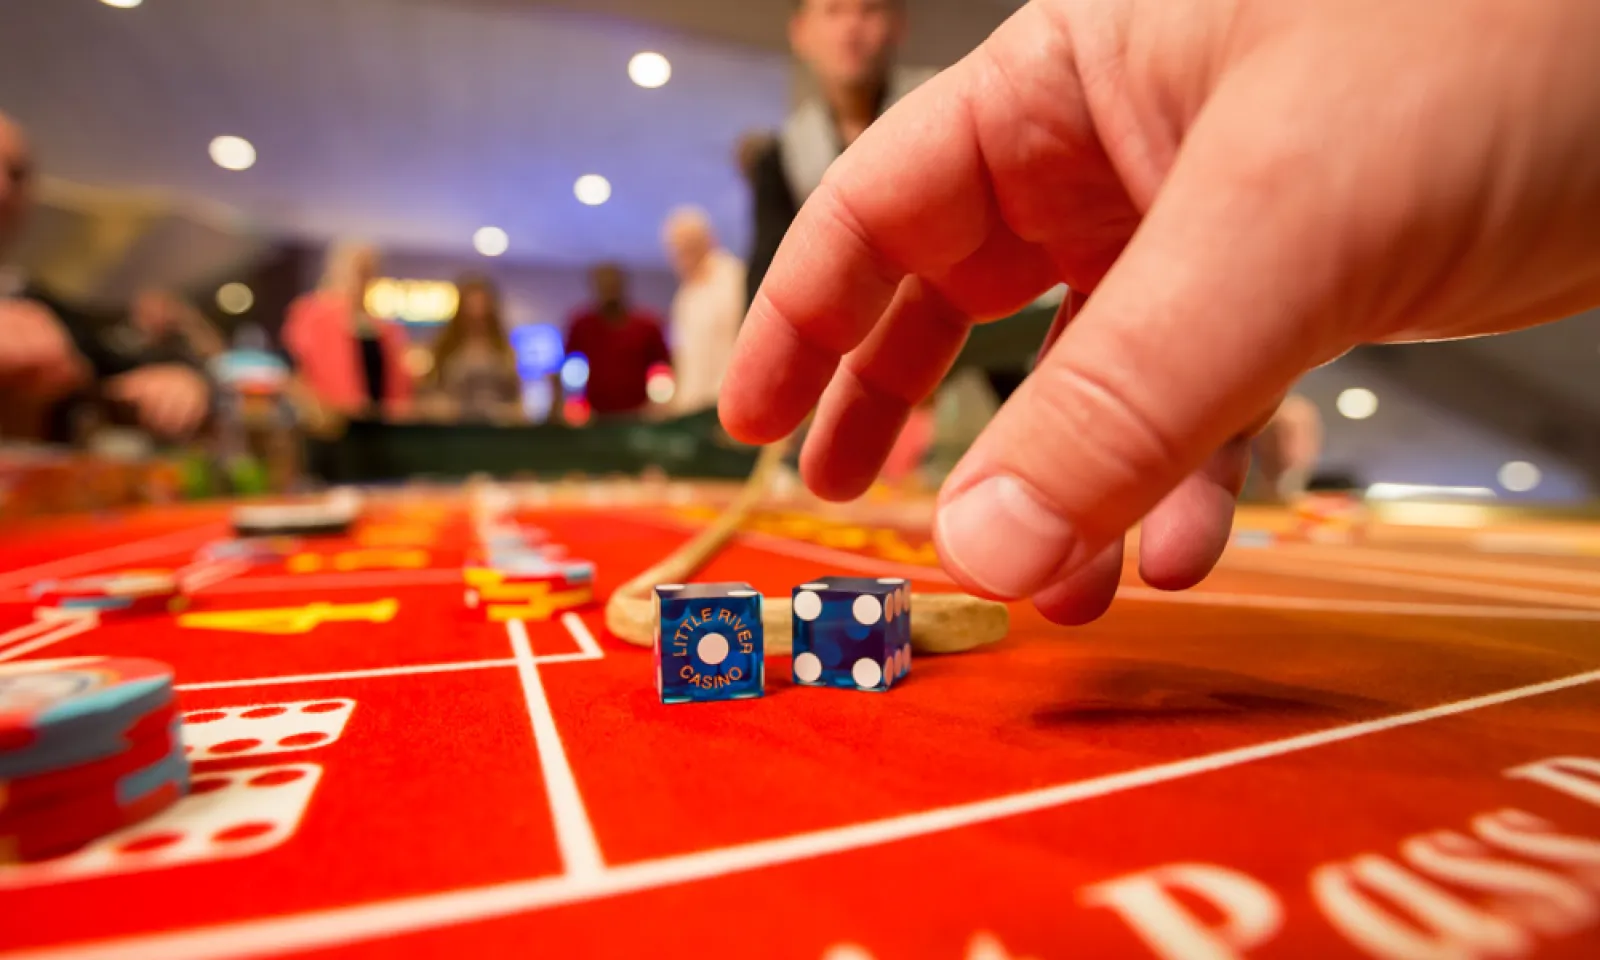 hands grabbing for dice sitting on red craps table